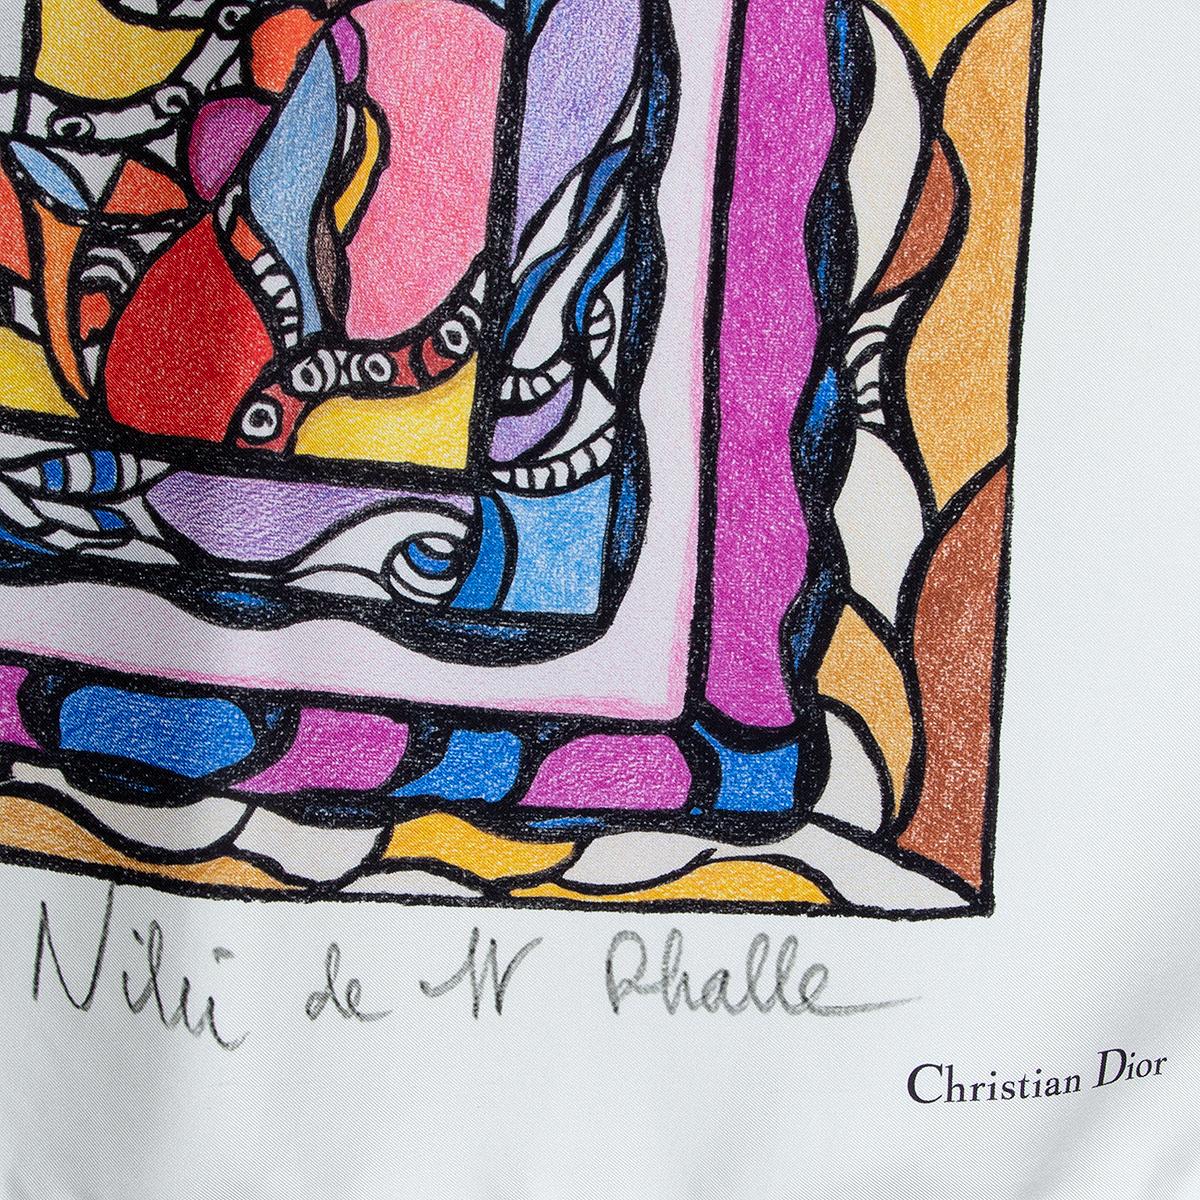 Christian Dior 'Strength' Niki de St. Phalle print scarf in off-white, black, blue, beige, light ornage, purple, lilac, red, orange, brown, olive green, sage, baby pink and yellow silk. Has been worn and is in excellent condition. 

Height 84cm